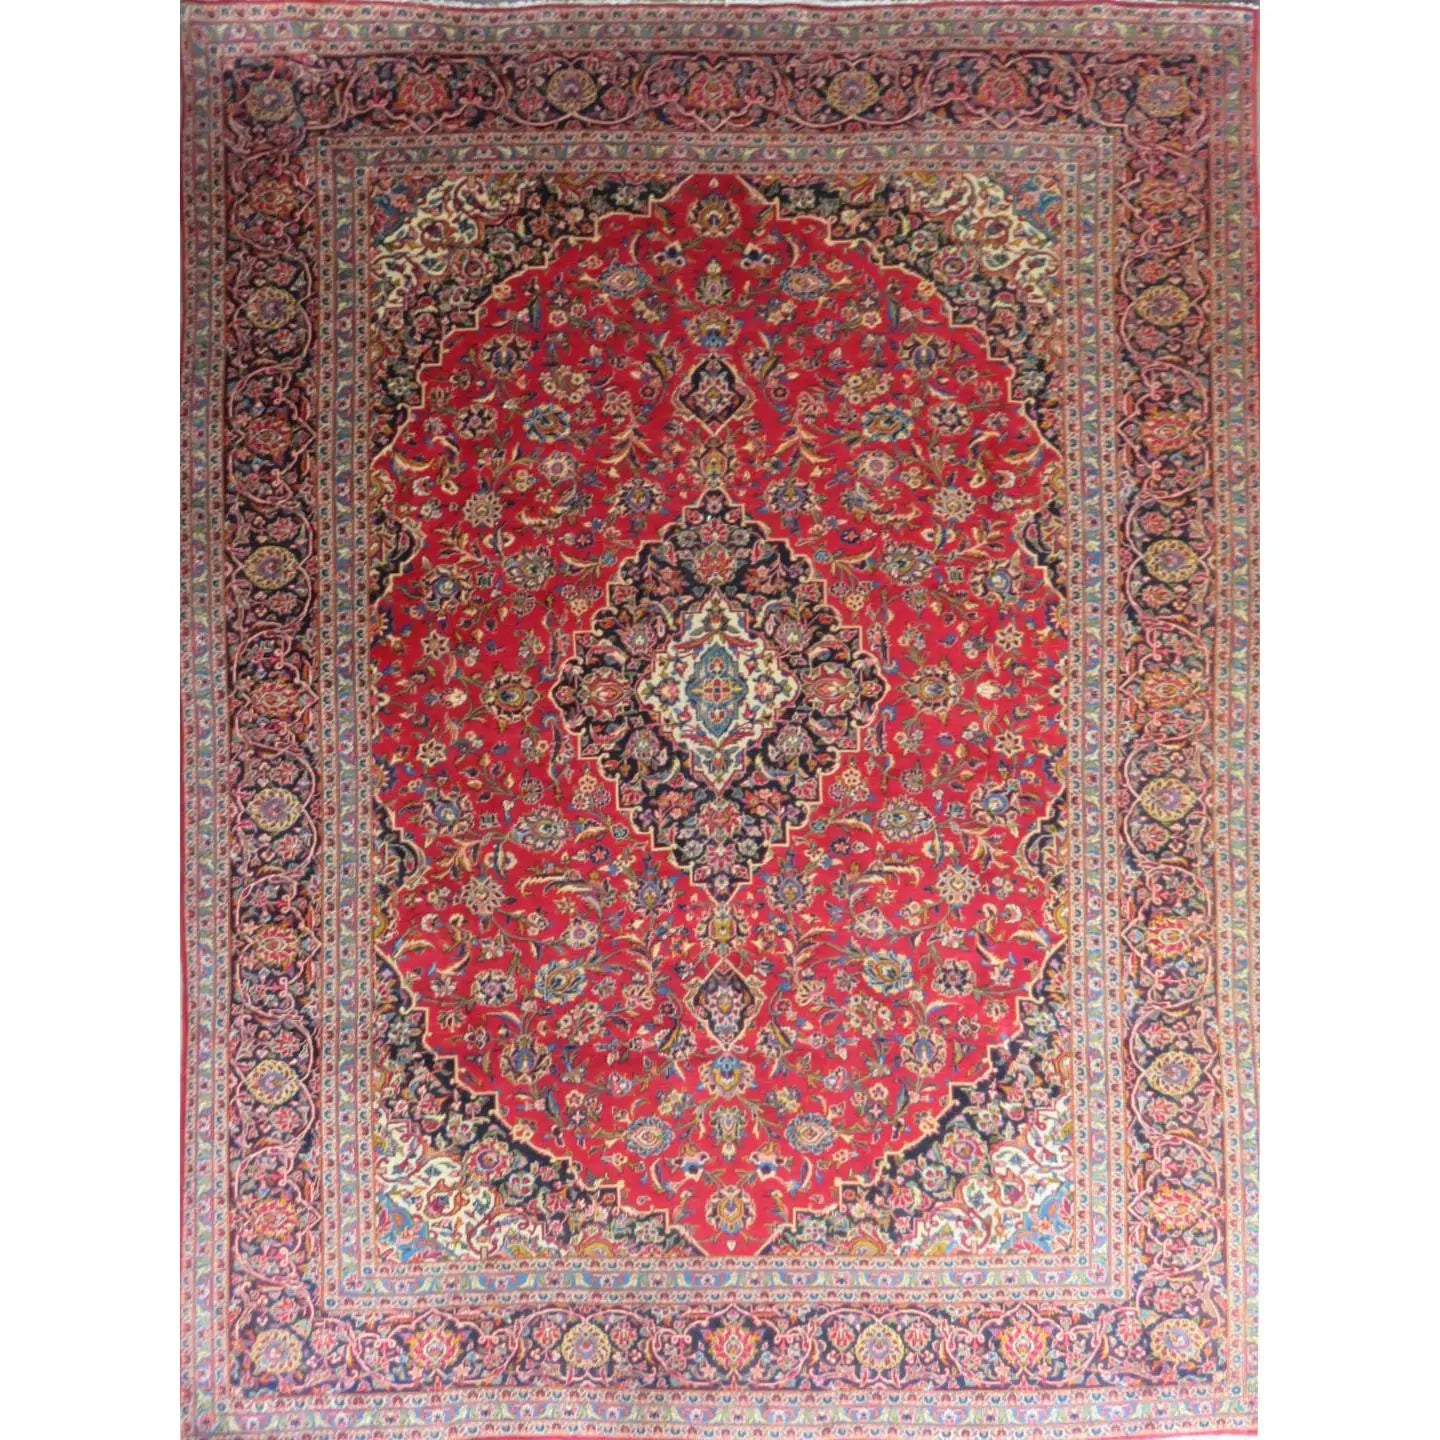 Hand-Knotted Persian Wool Rug _ Luxurious Vintage Design, 13'0" x 9'8", Artisan Crafted